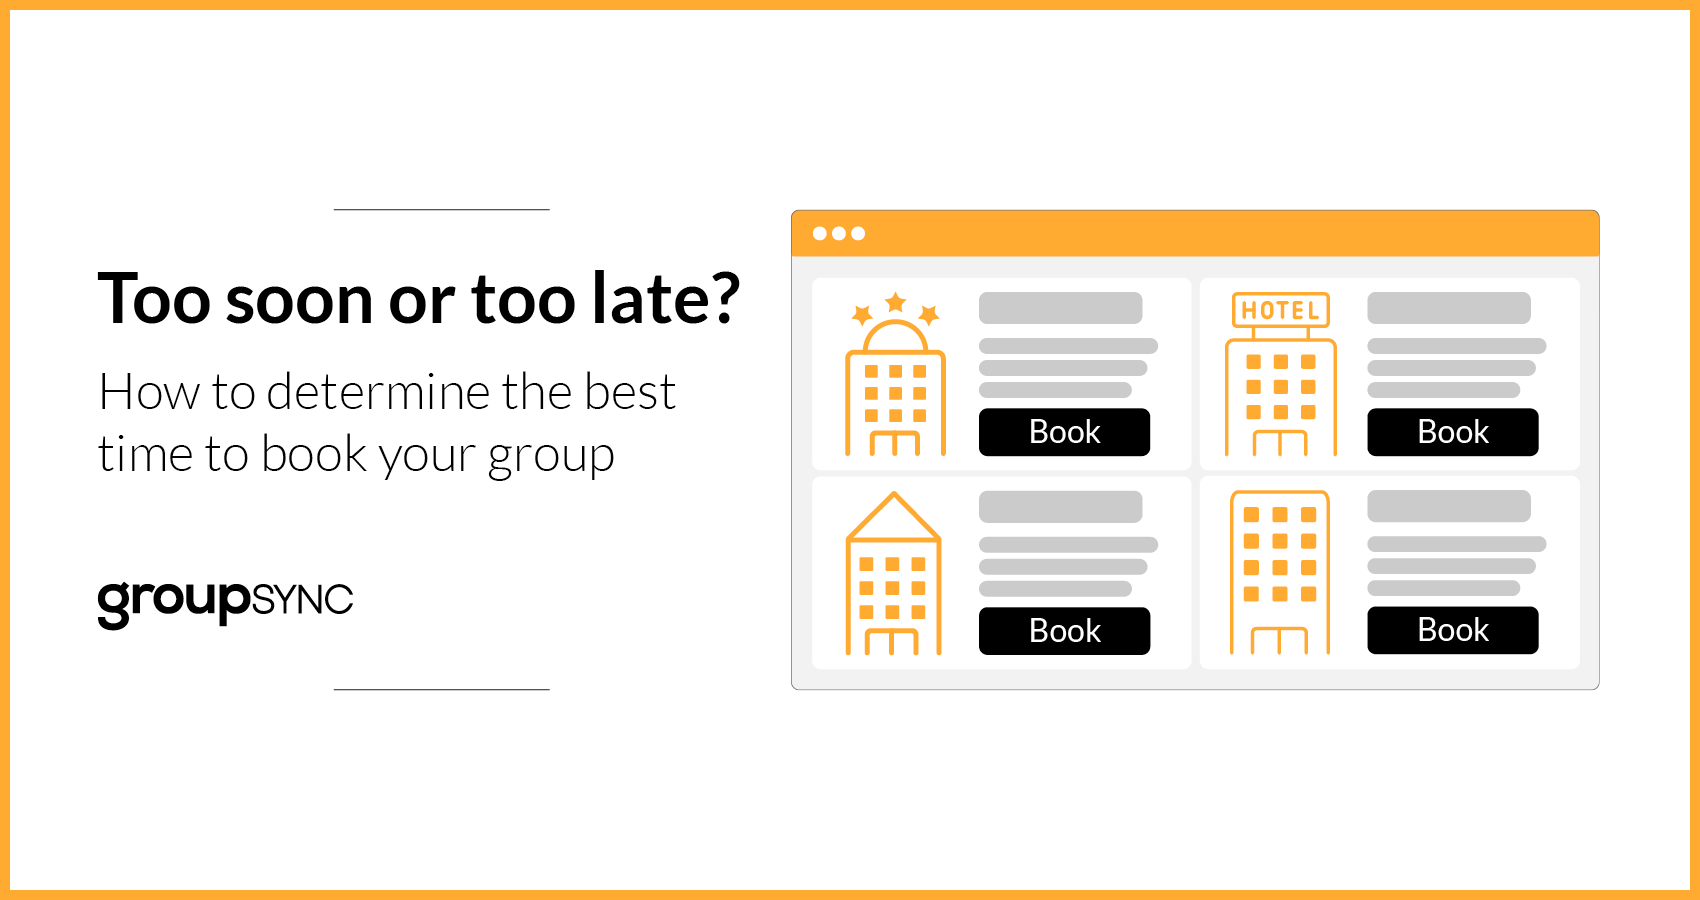 How to determine the best time to book your group